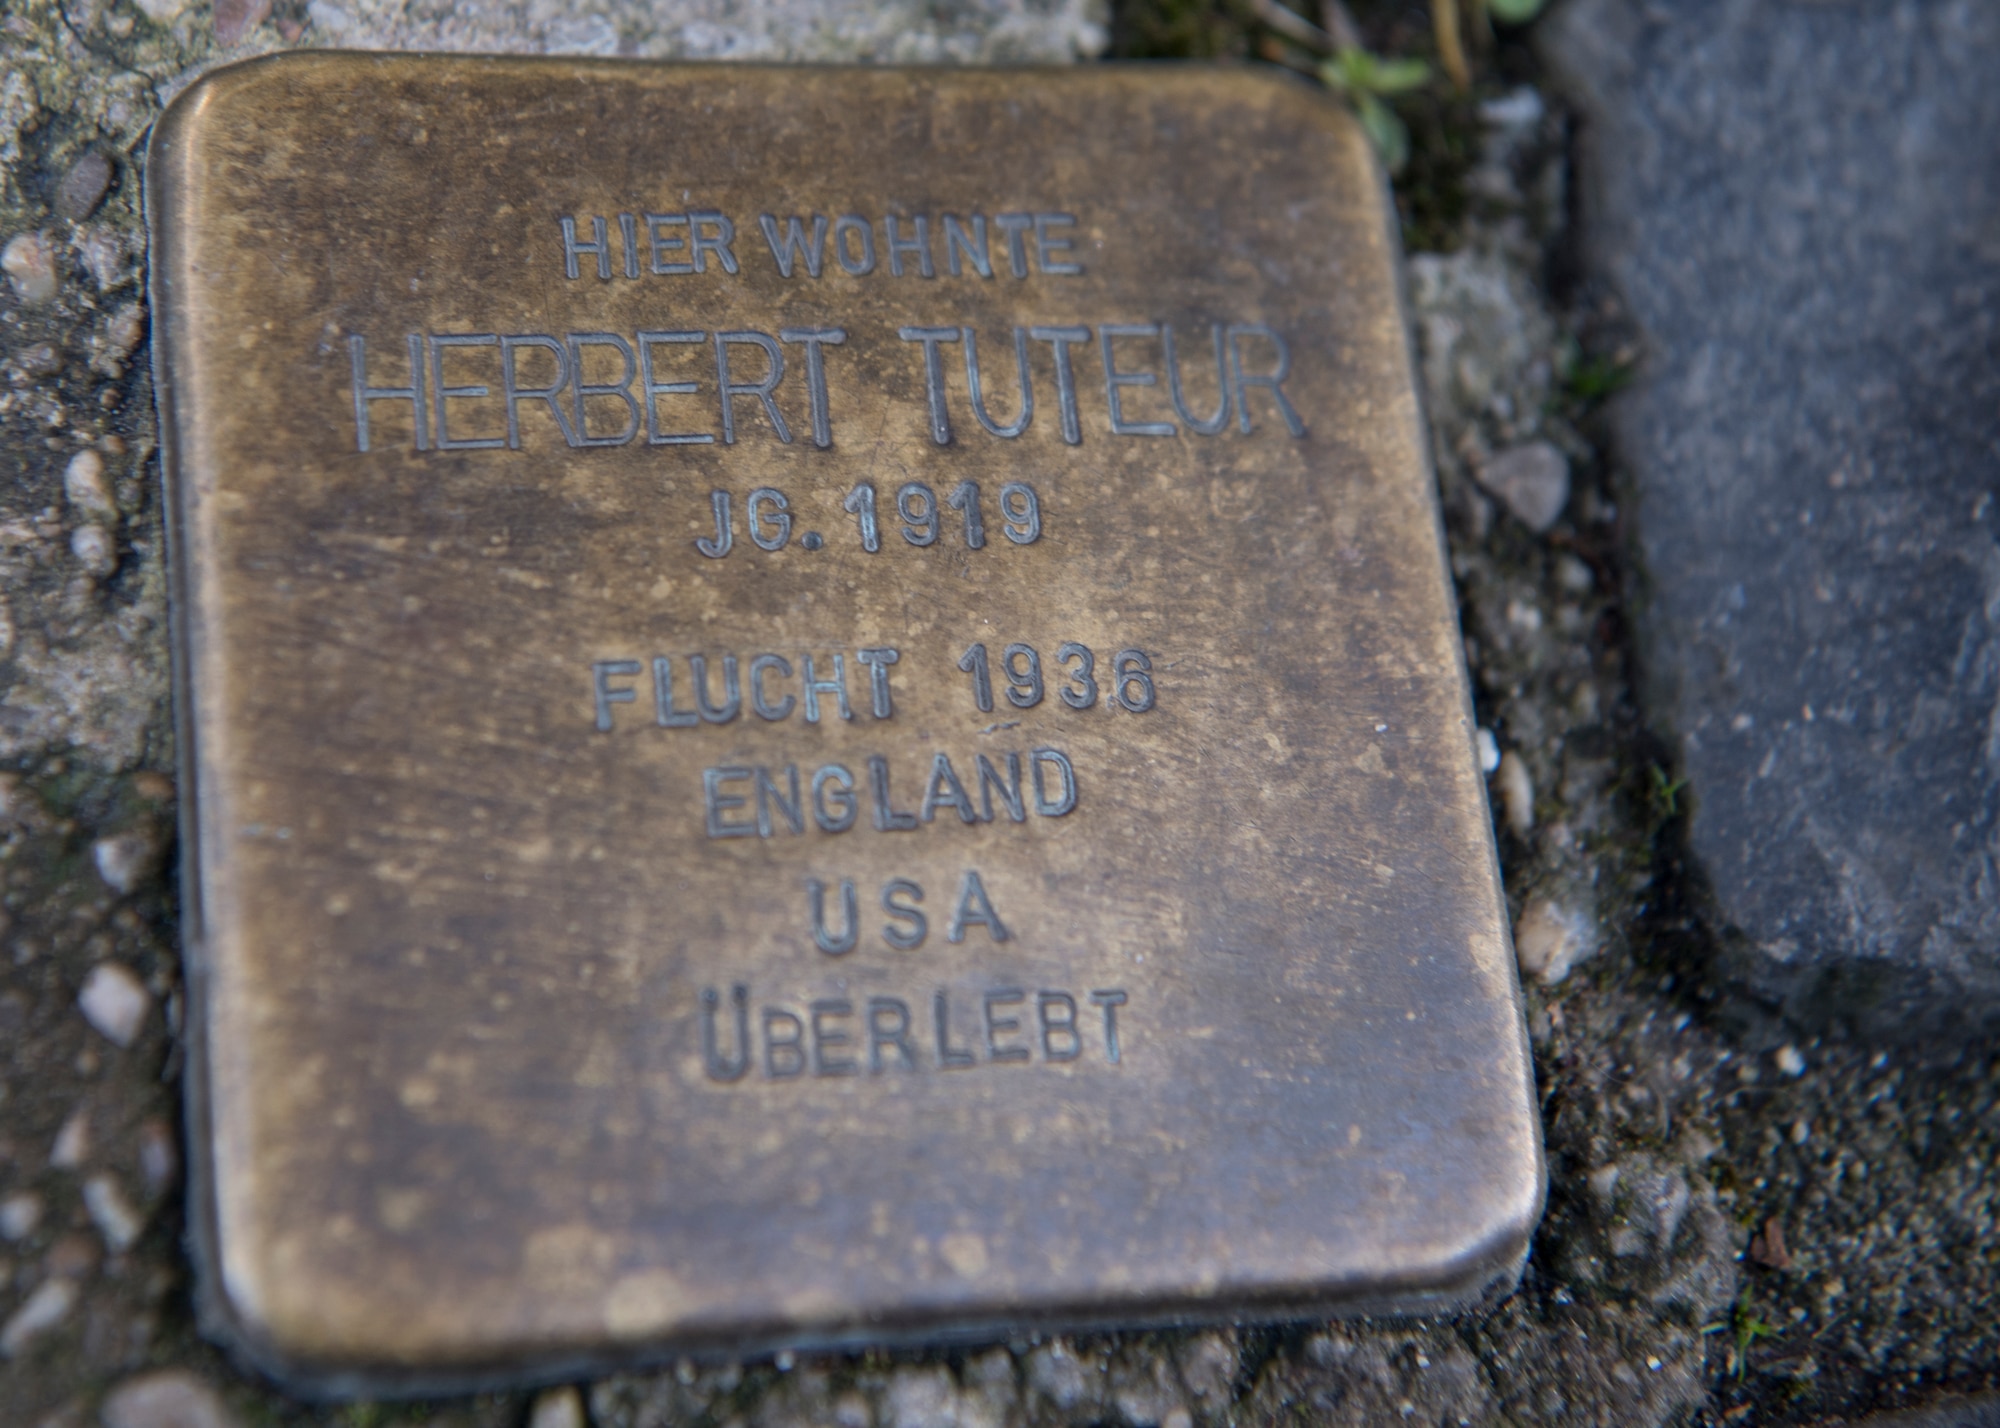 A small brass plaques called a “stumbling stone” sits in the pavement and depicts a holocaust victim’s name, date of birth, and date and place of death. Service members and their families can recognize victims of the Holocaust by learning about the Kaiserslautern memorials and local history throughout the year. (U.S. Air Force photo by Staff Sgt. Kirby Turbak)